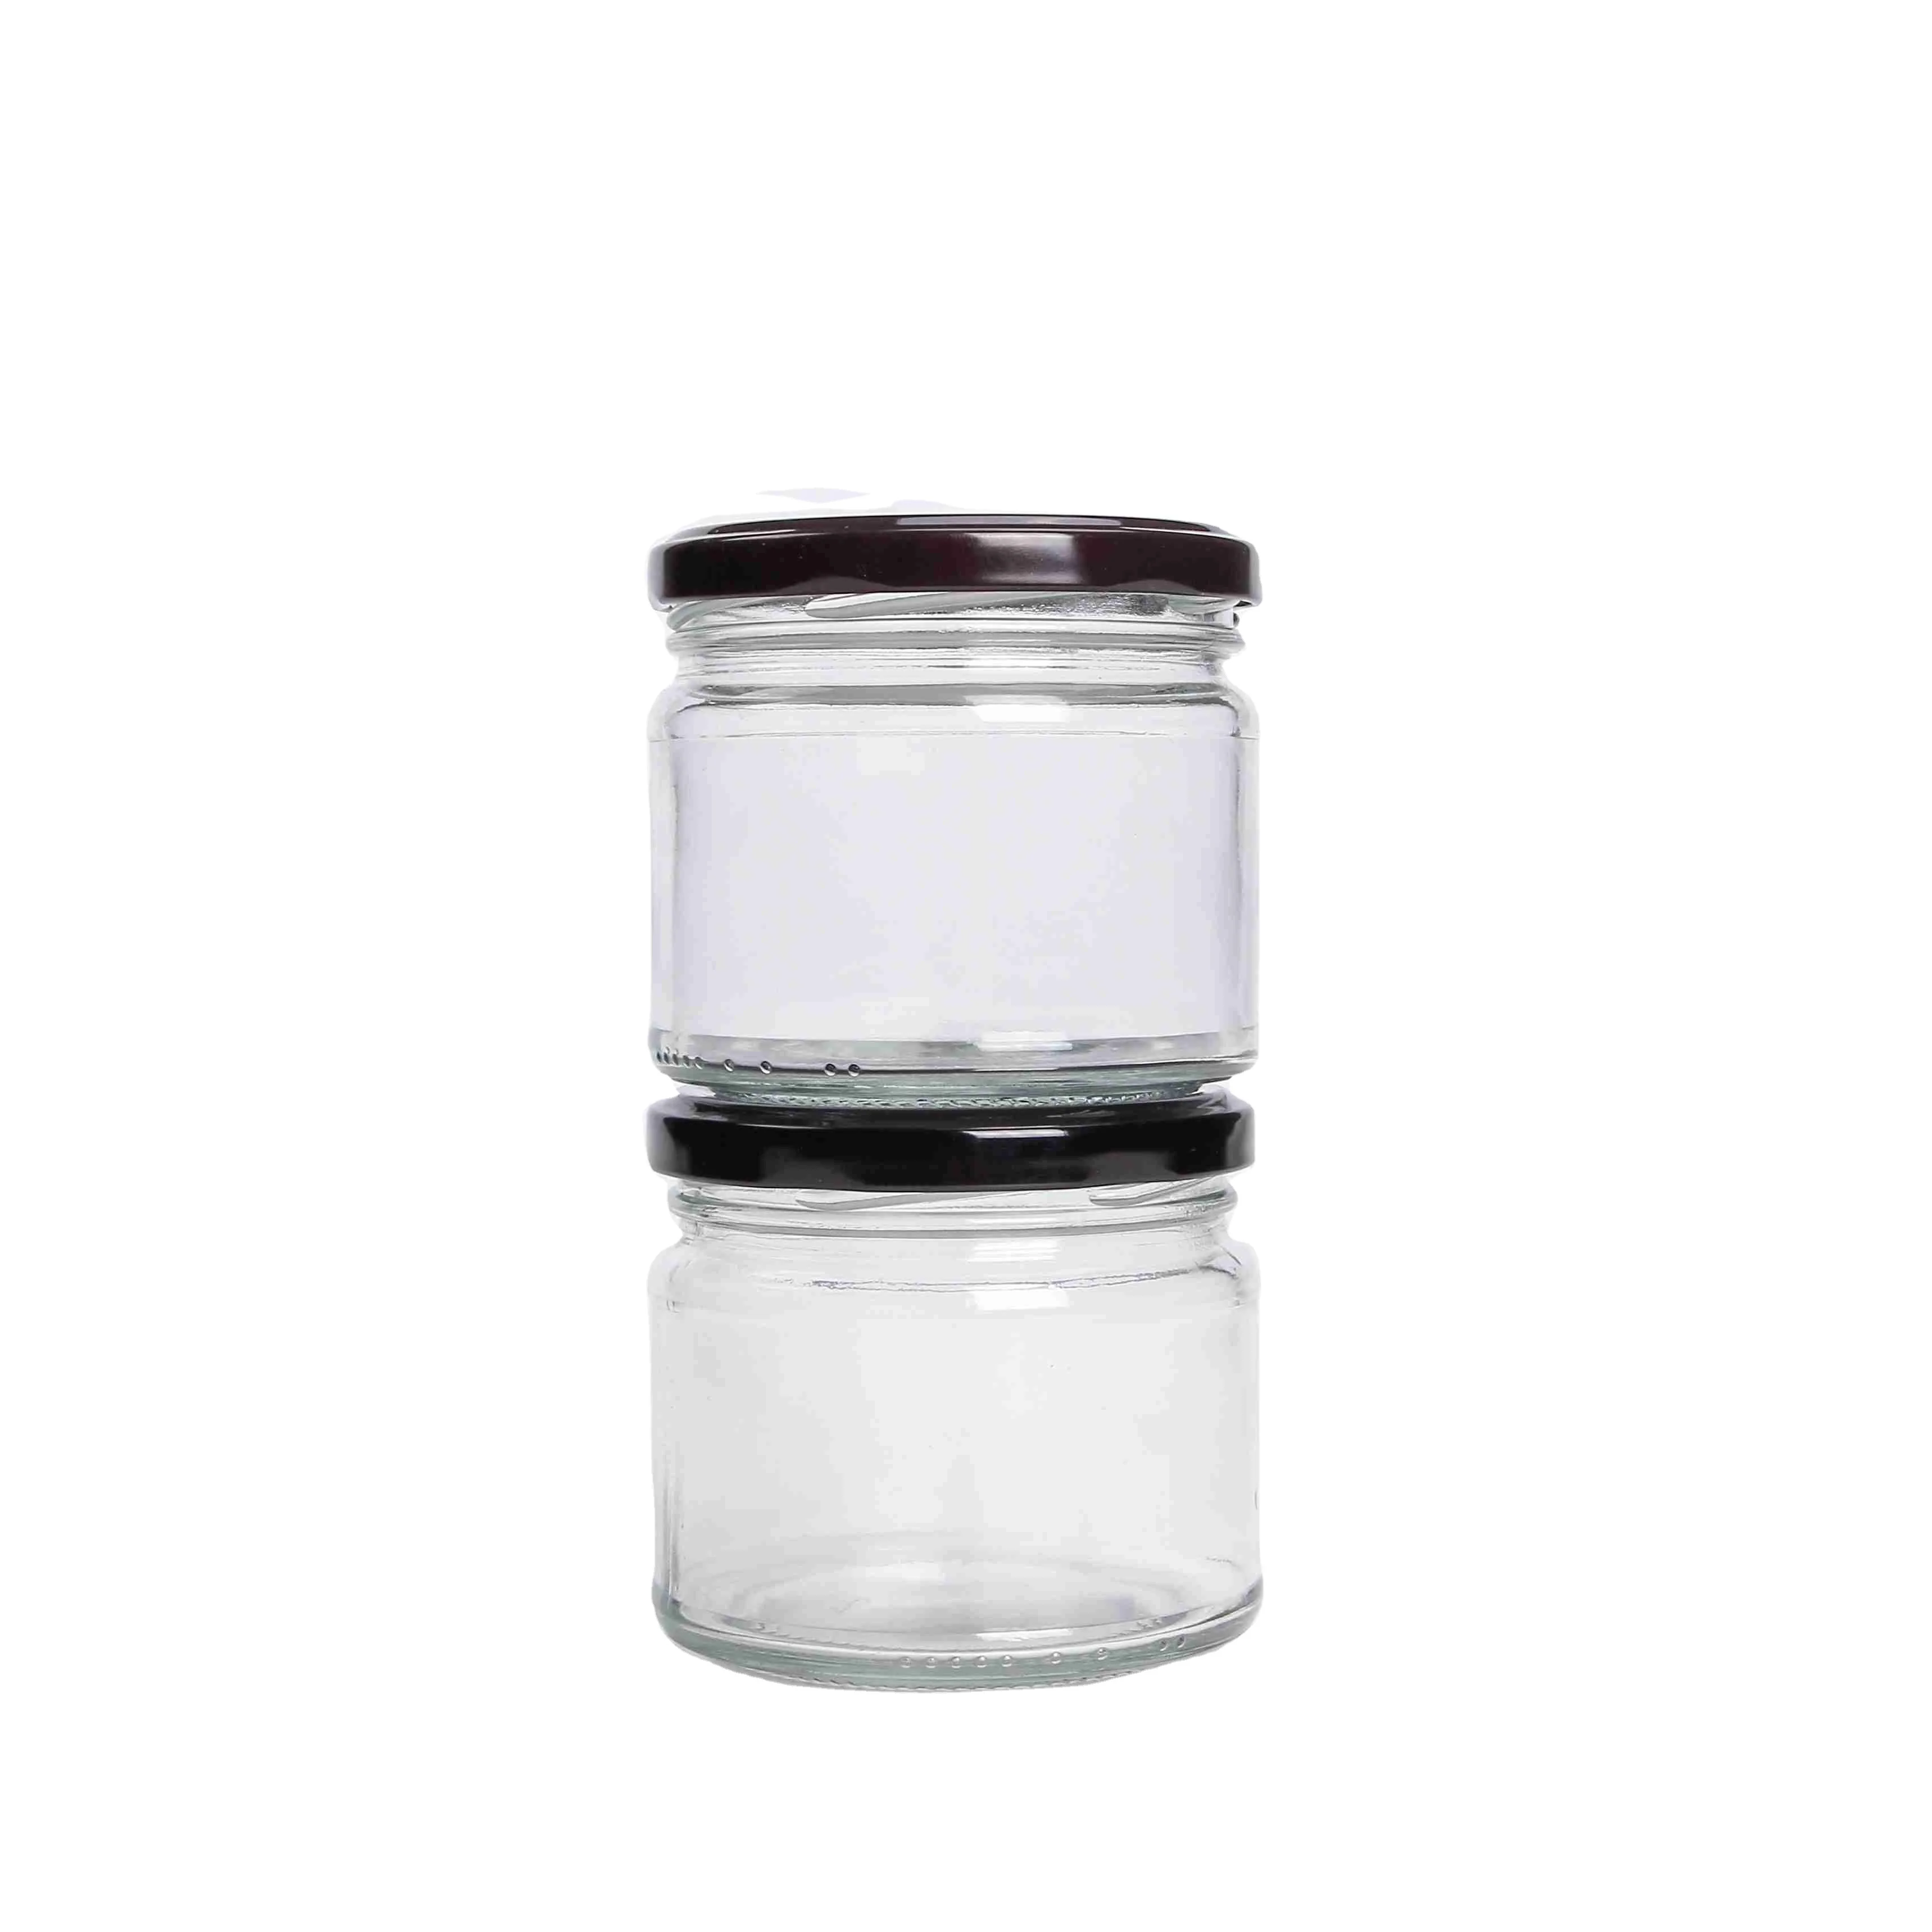 

300ml Cheap Glass Jar Packaging from Glass Factory Wholesale empty round glass jar with Lug Lid Hot Filling Jam Jar